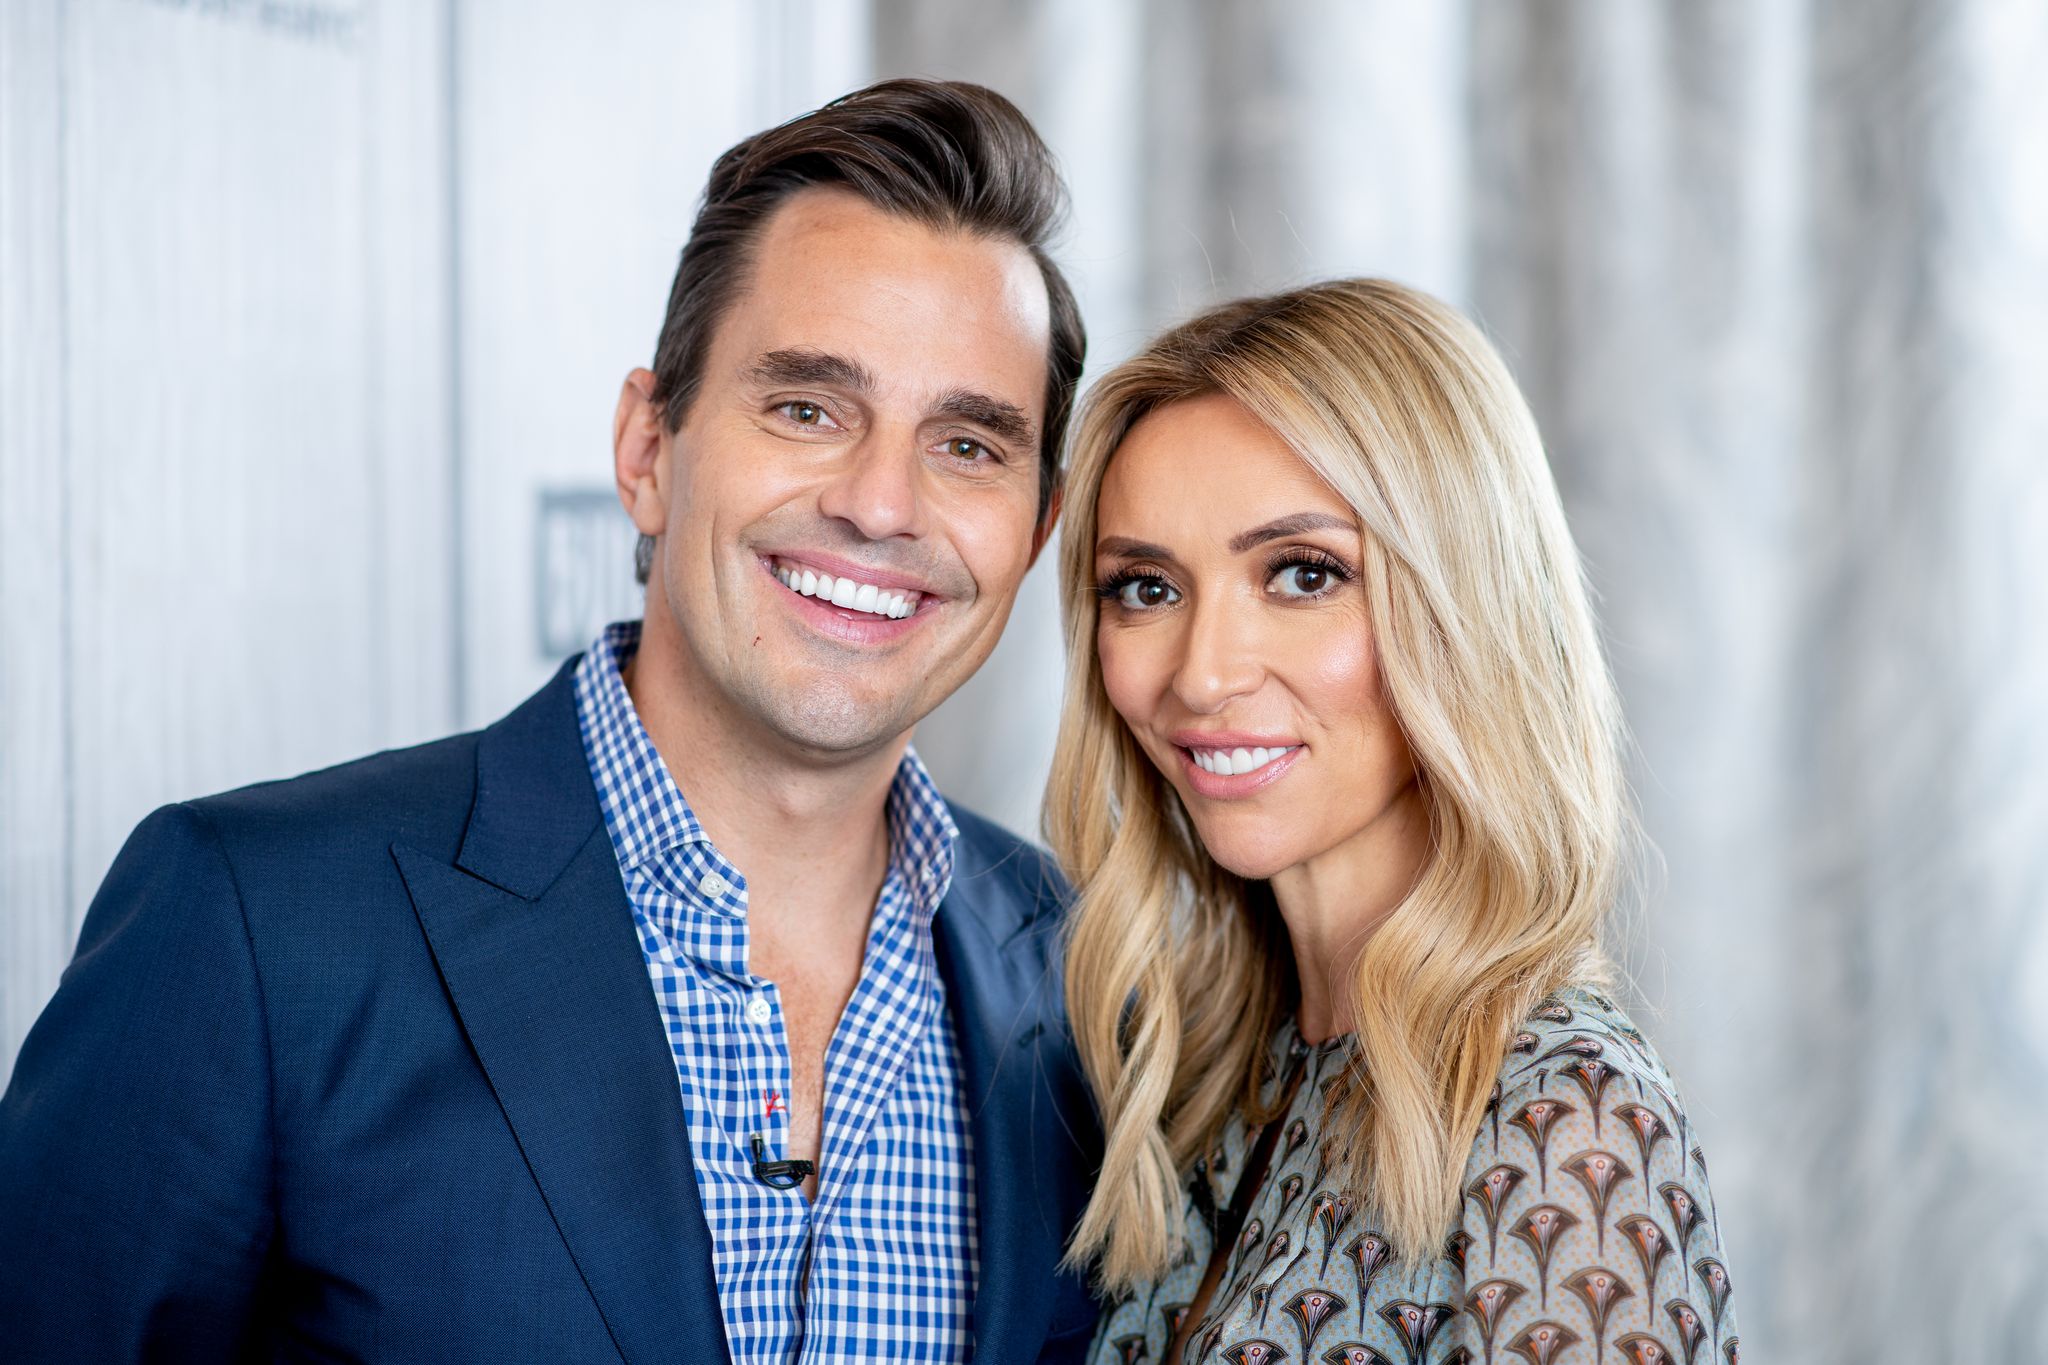 Bill Rancic and Giuliana Rancic at Build Studio in 2018 in New York City | Source: Getty Images